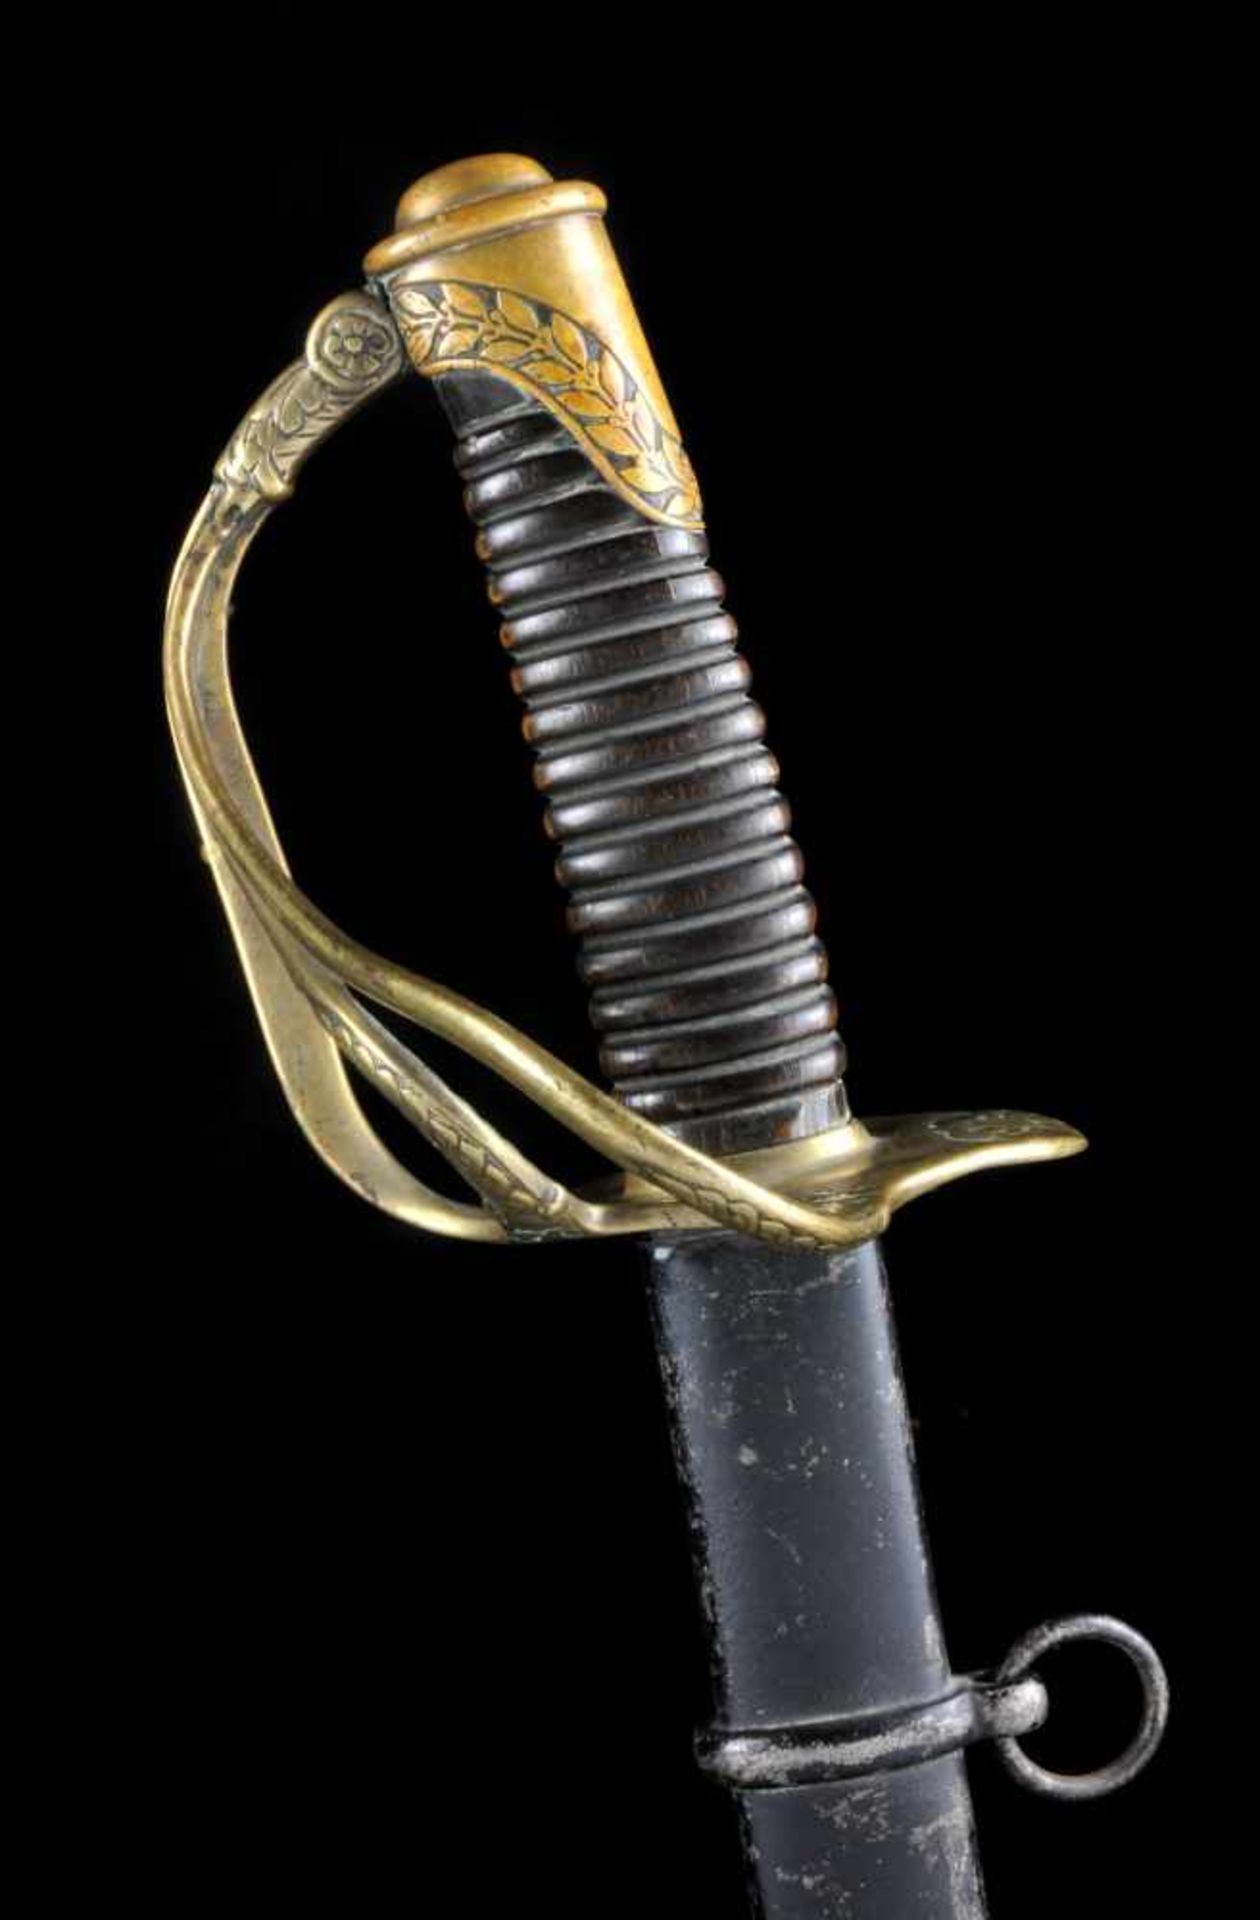 A FRENCH M1822 LIGHT CAVALRY OFFICER’S SWORD, LUXURY VERSION WITH IMPORTED GERMAN DAMASCENED